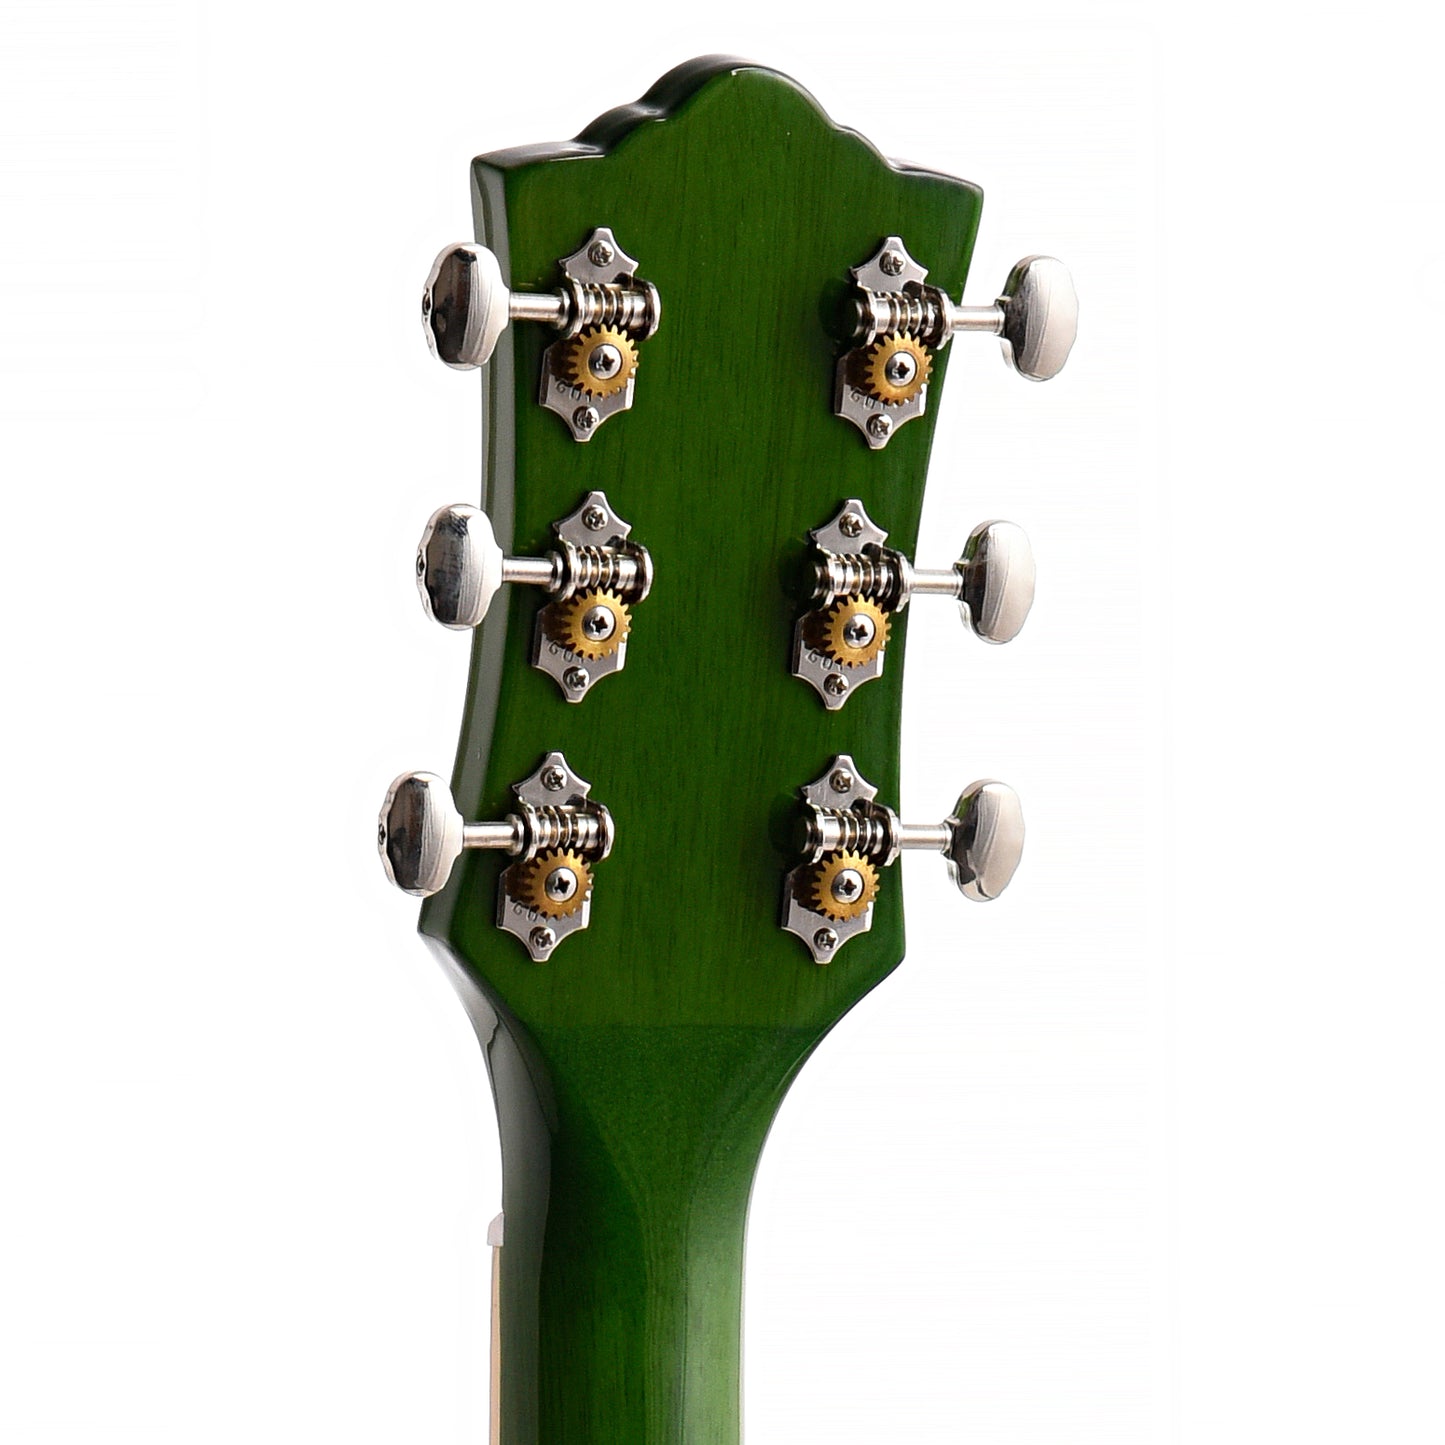 Image 7 of Guild Starfire I Double Cutaway Semi-Hollow Body Guitar with Vibrato, Emerald Green - SKU# GSF1DCV-GRN : Product Type Hollow Body Electric Guitars : Elderly Instruments